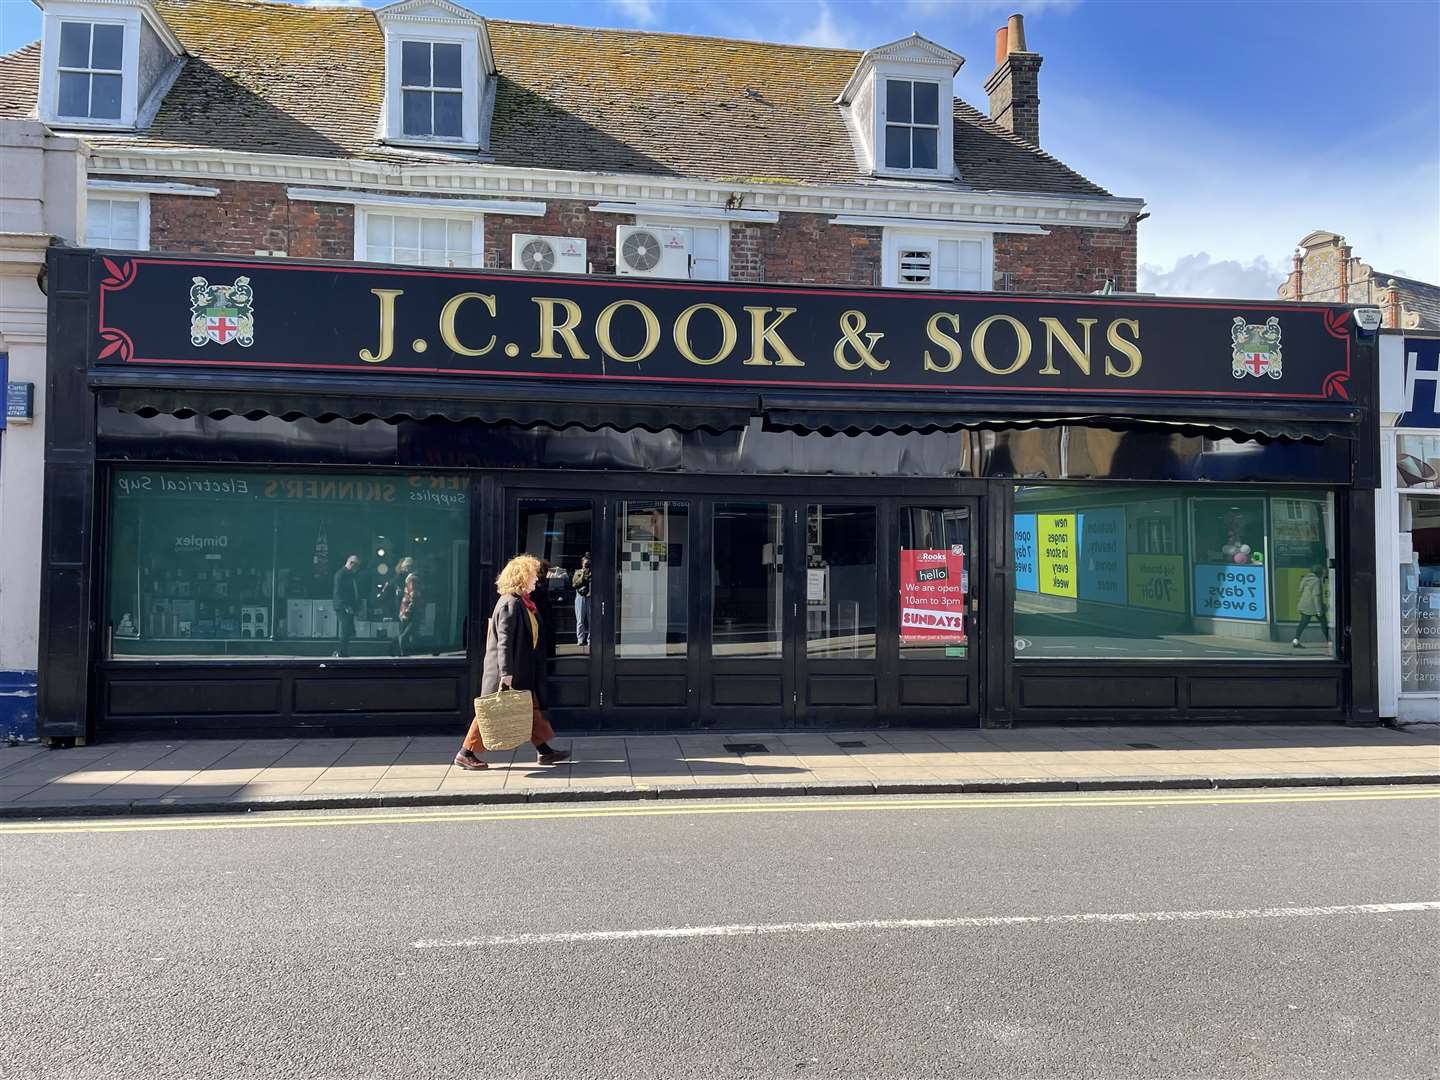 Rooks in Deal is one of 11 branches to have closed